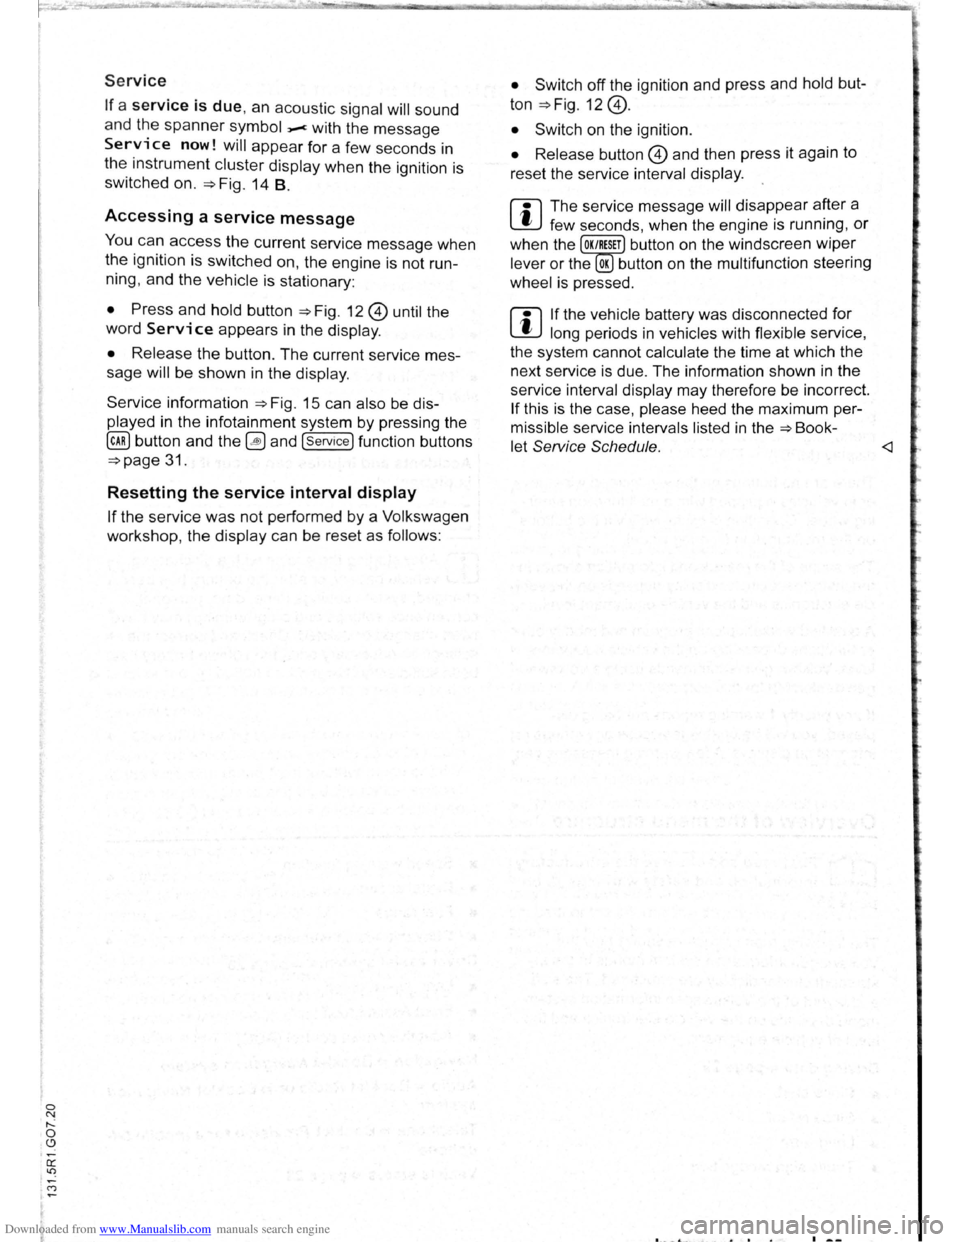 VOLKSWAGEN BEETLE 2008  Owners Manual Downloaded from www.Manualslib.com manuals search engine 0 N ,....: 0 .C) 
Service 
If a service is due, an acoustic signal will sound 
and the spanner symbol _.c with the message 
Service now! will a